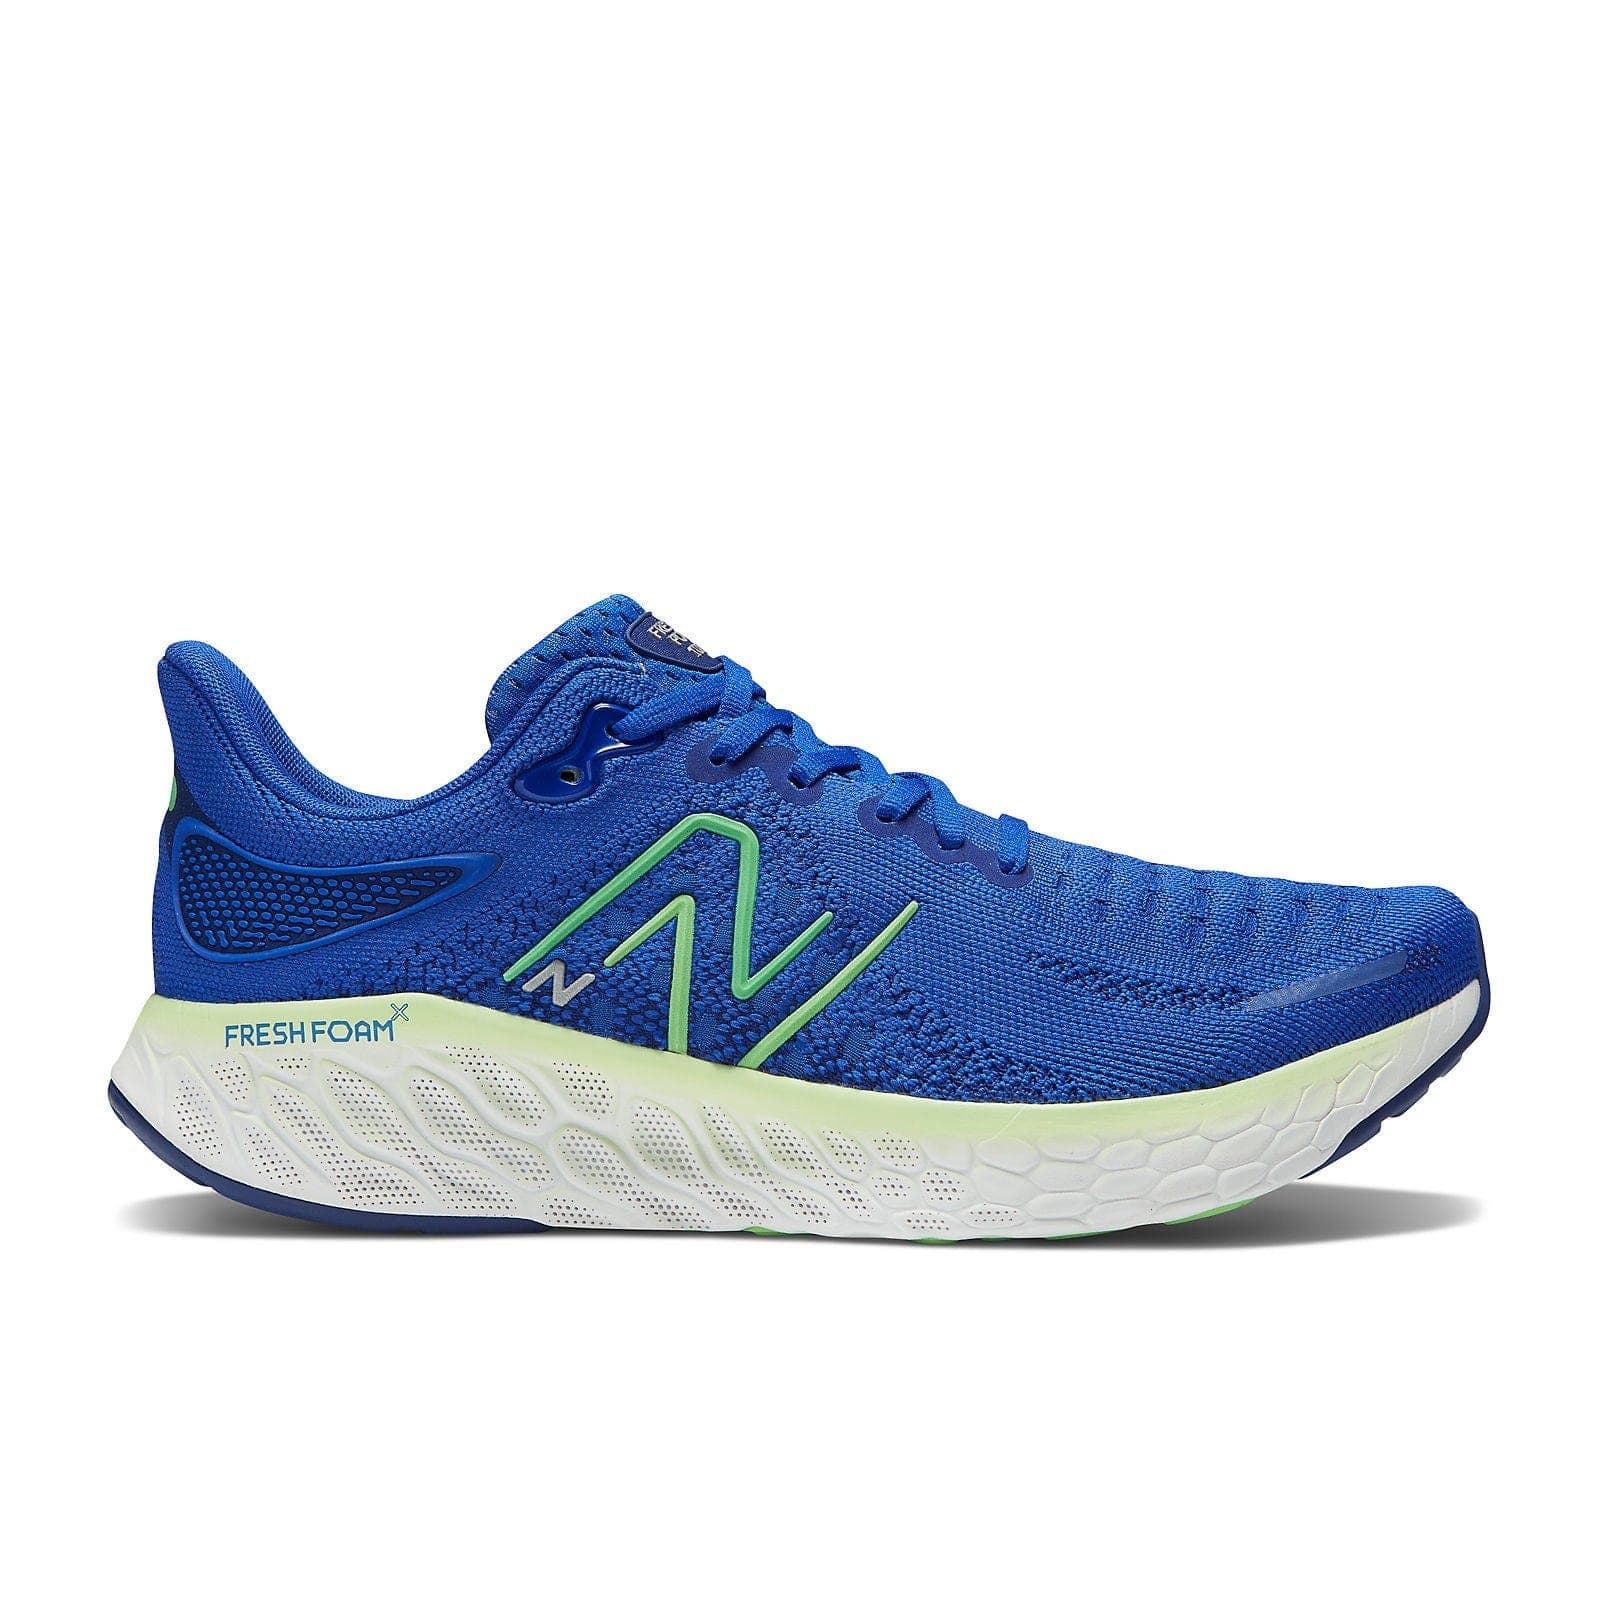 New Balance Fresh Foam X 1080 V12 (Men's) - Blue with Green Apple and Vibrant Spring